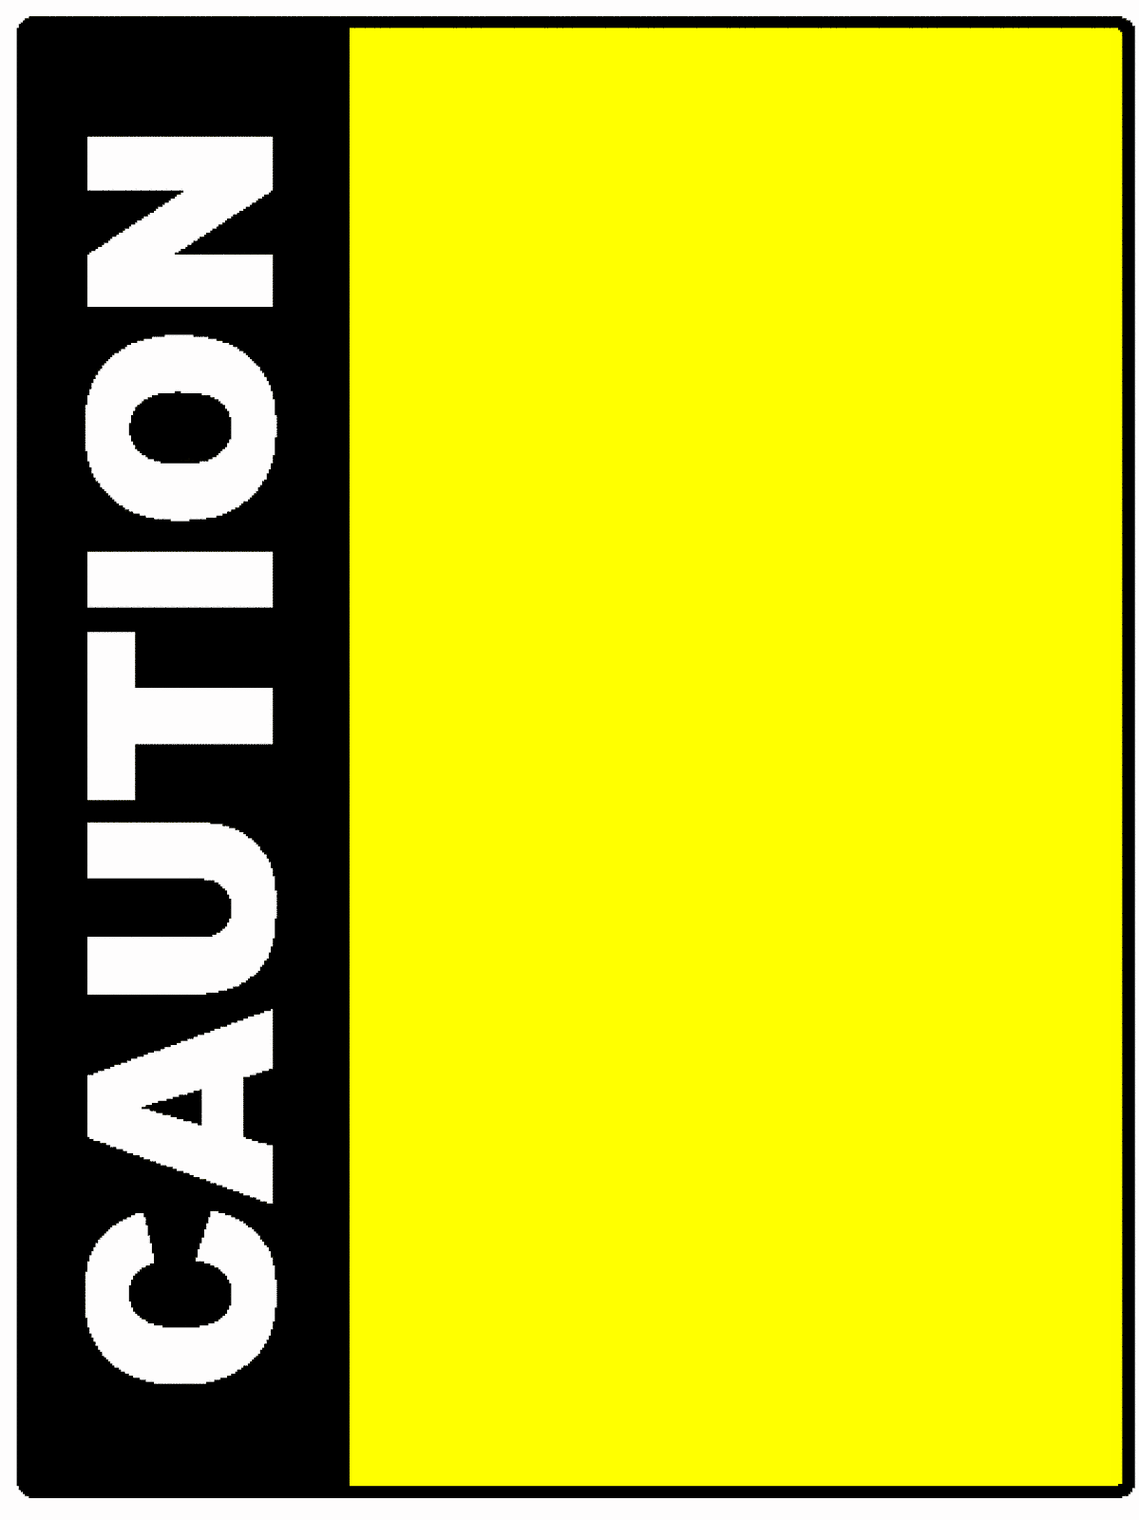 Caution Tape Border Clipart - Free to use Clip Art Resource